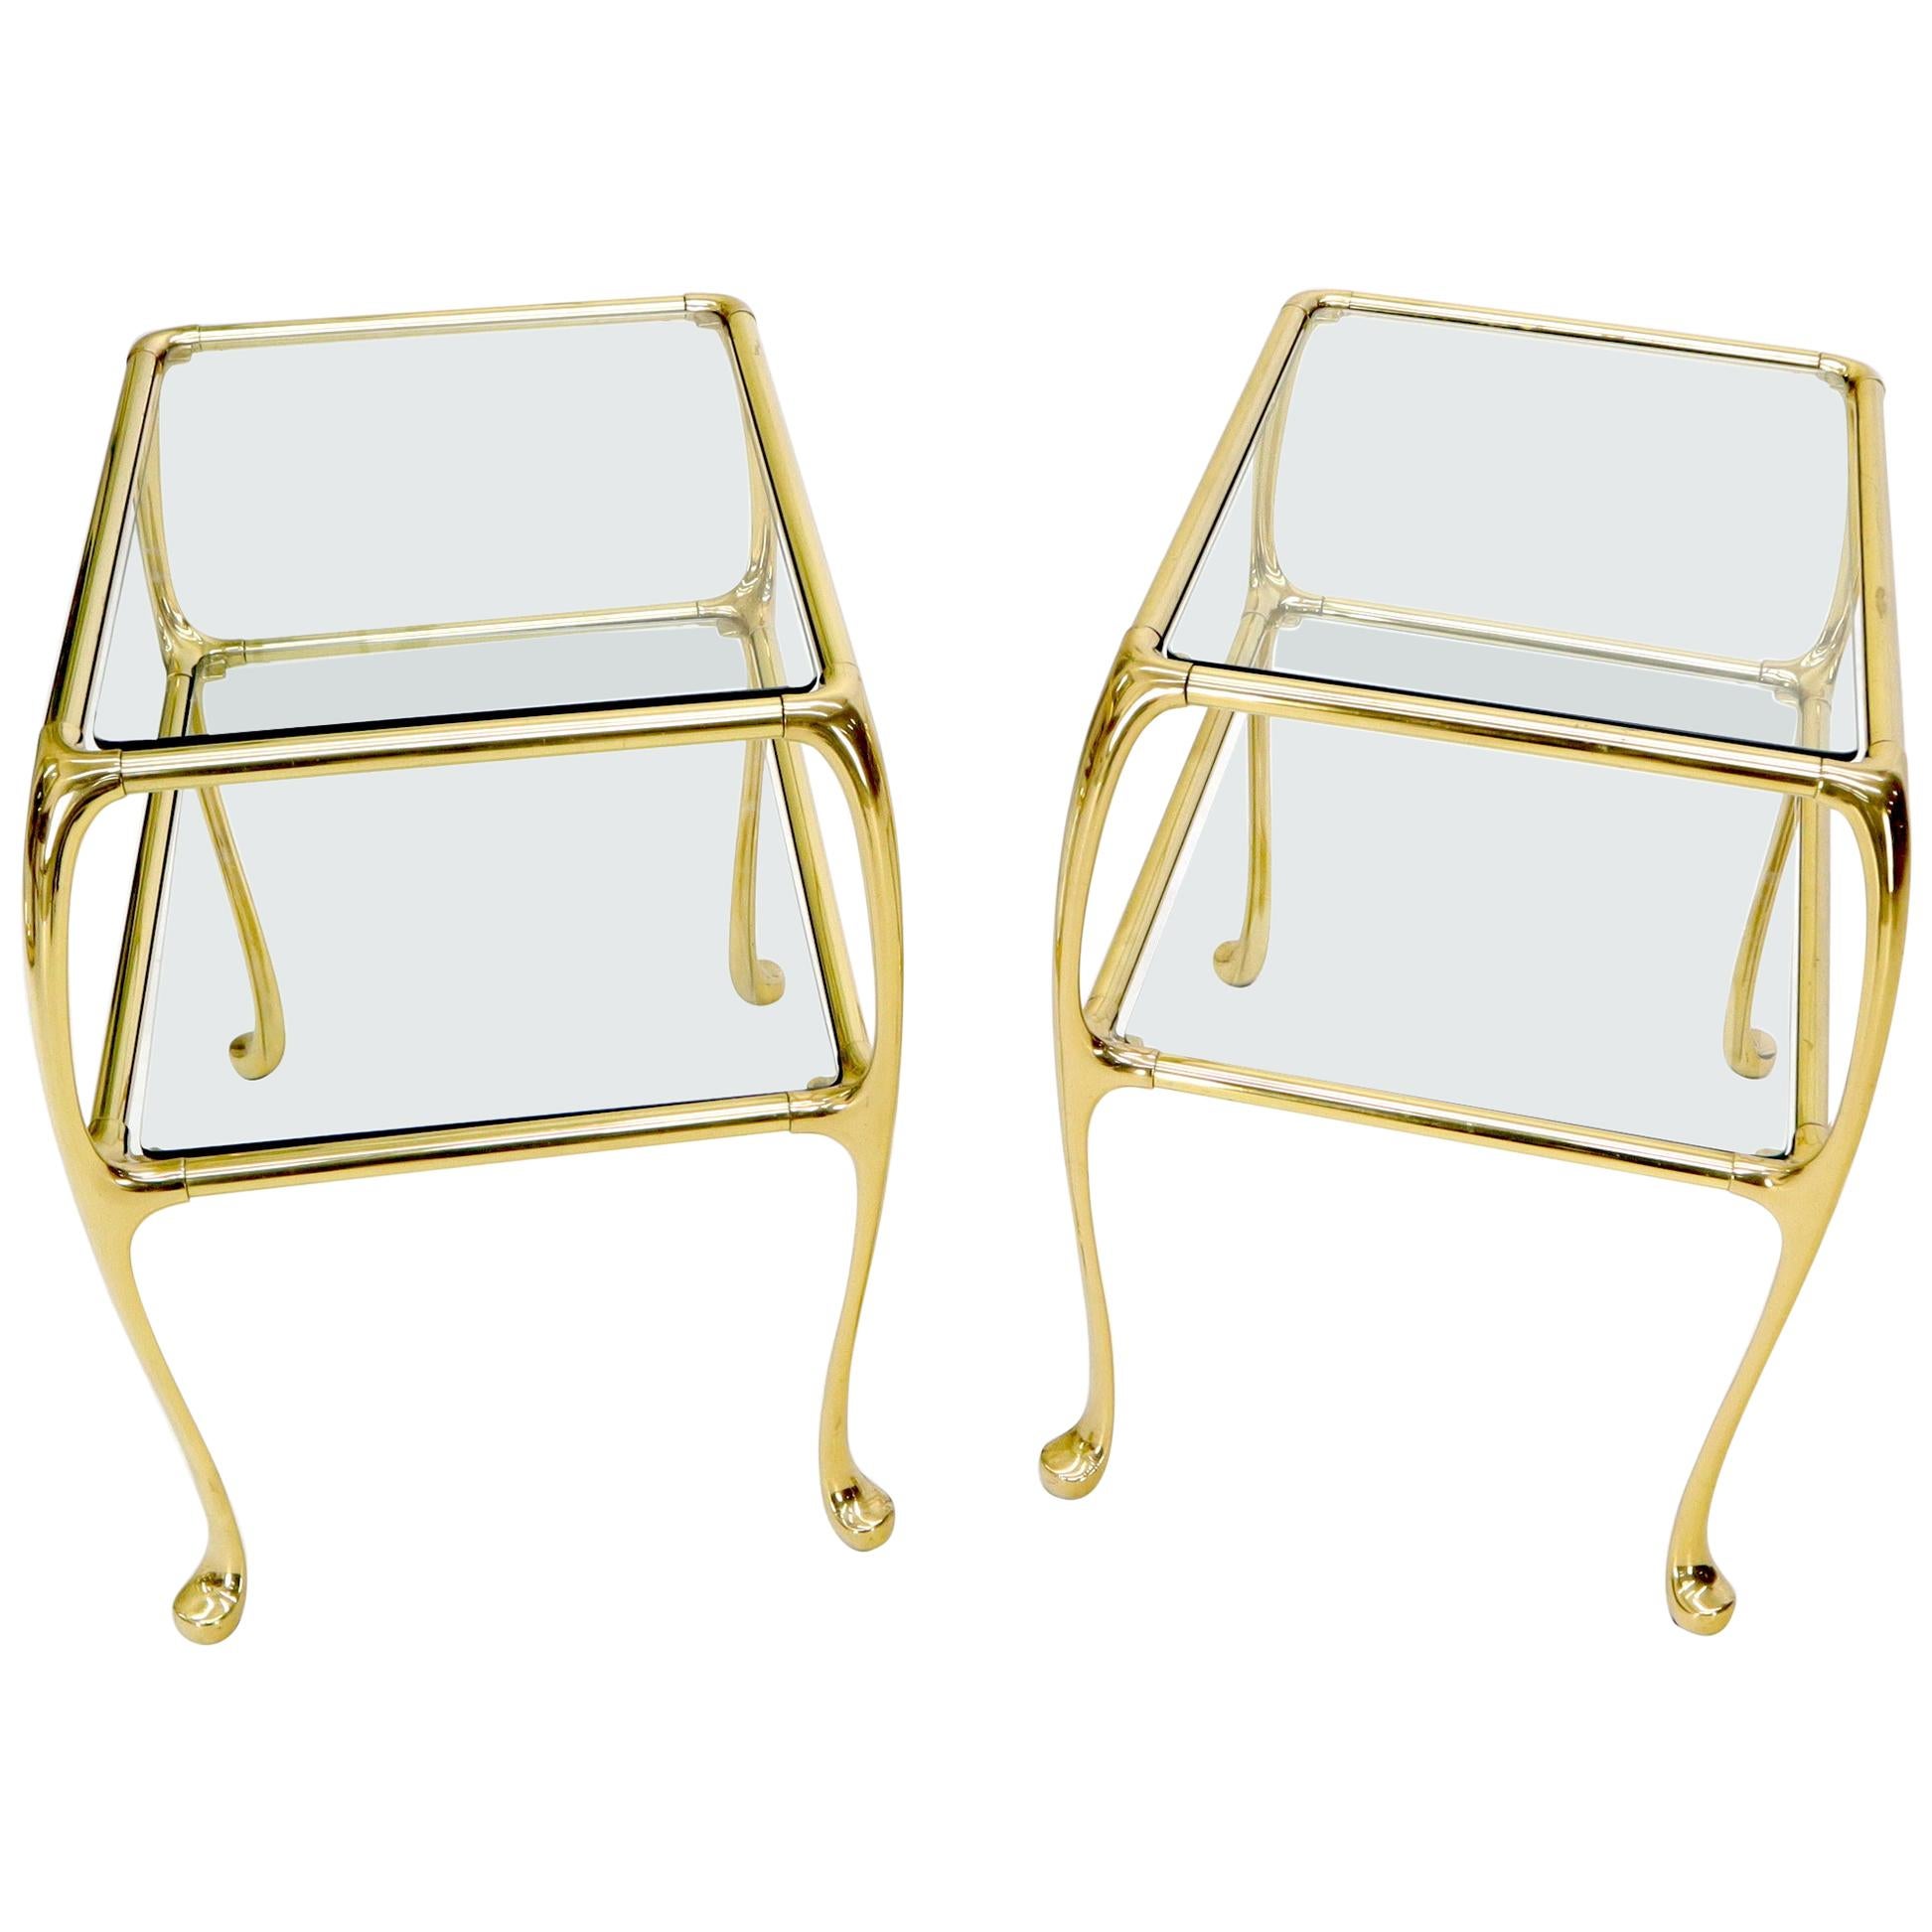 Pair of Solid Brass or Bronze Rectangular Two-Tier Glass Top Side End Tables